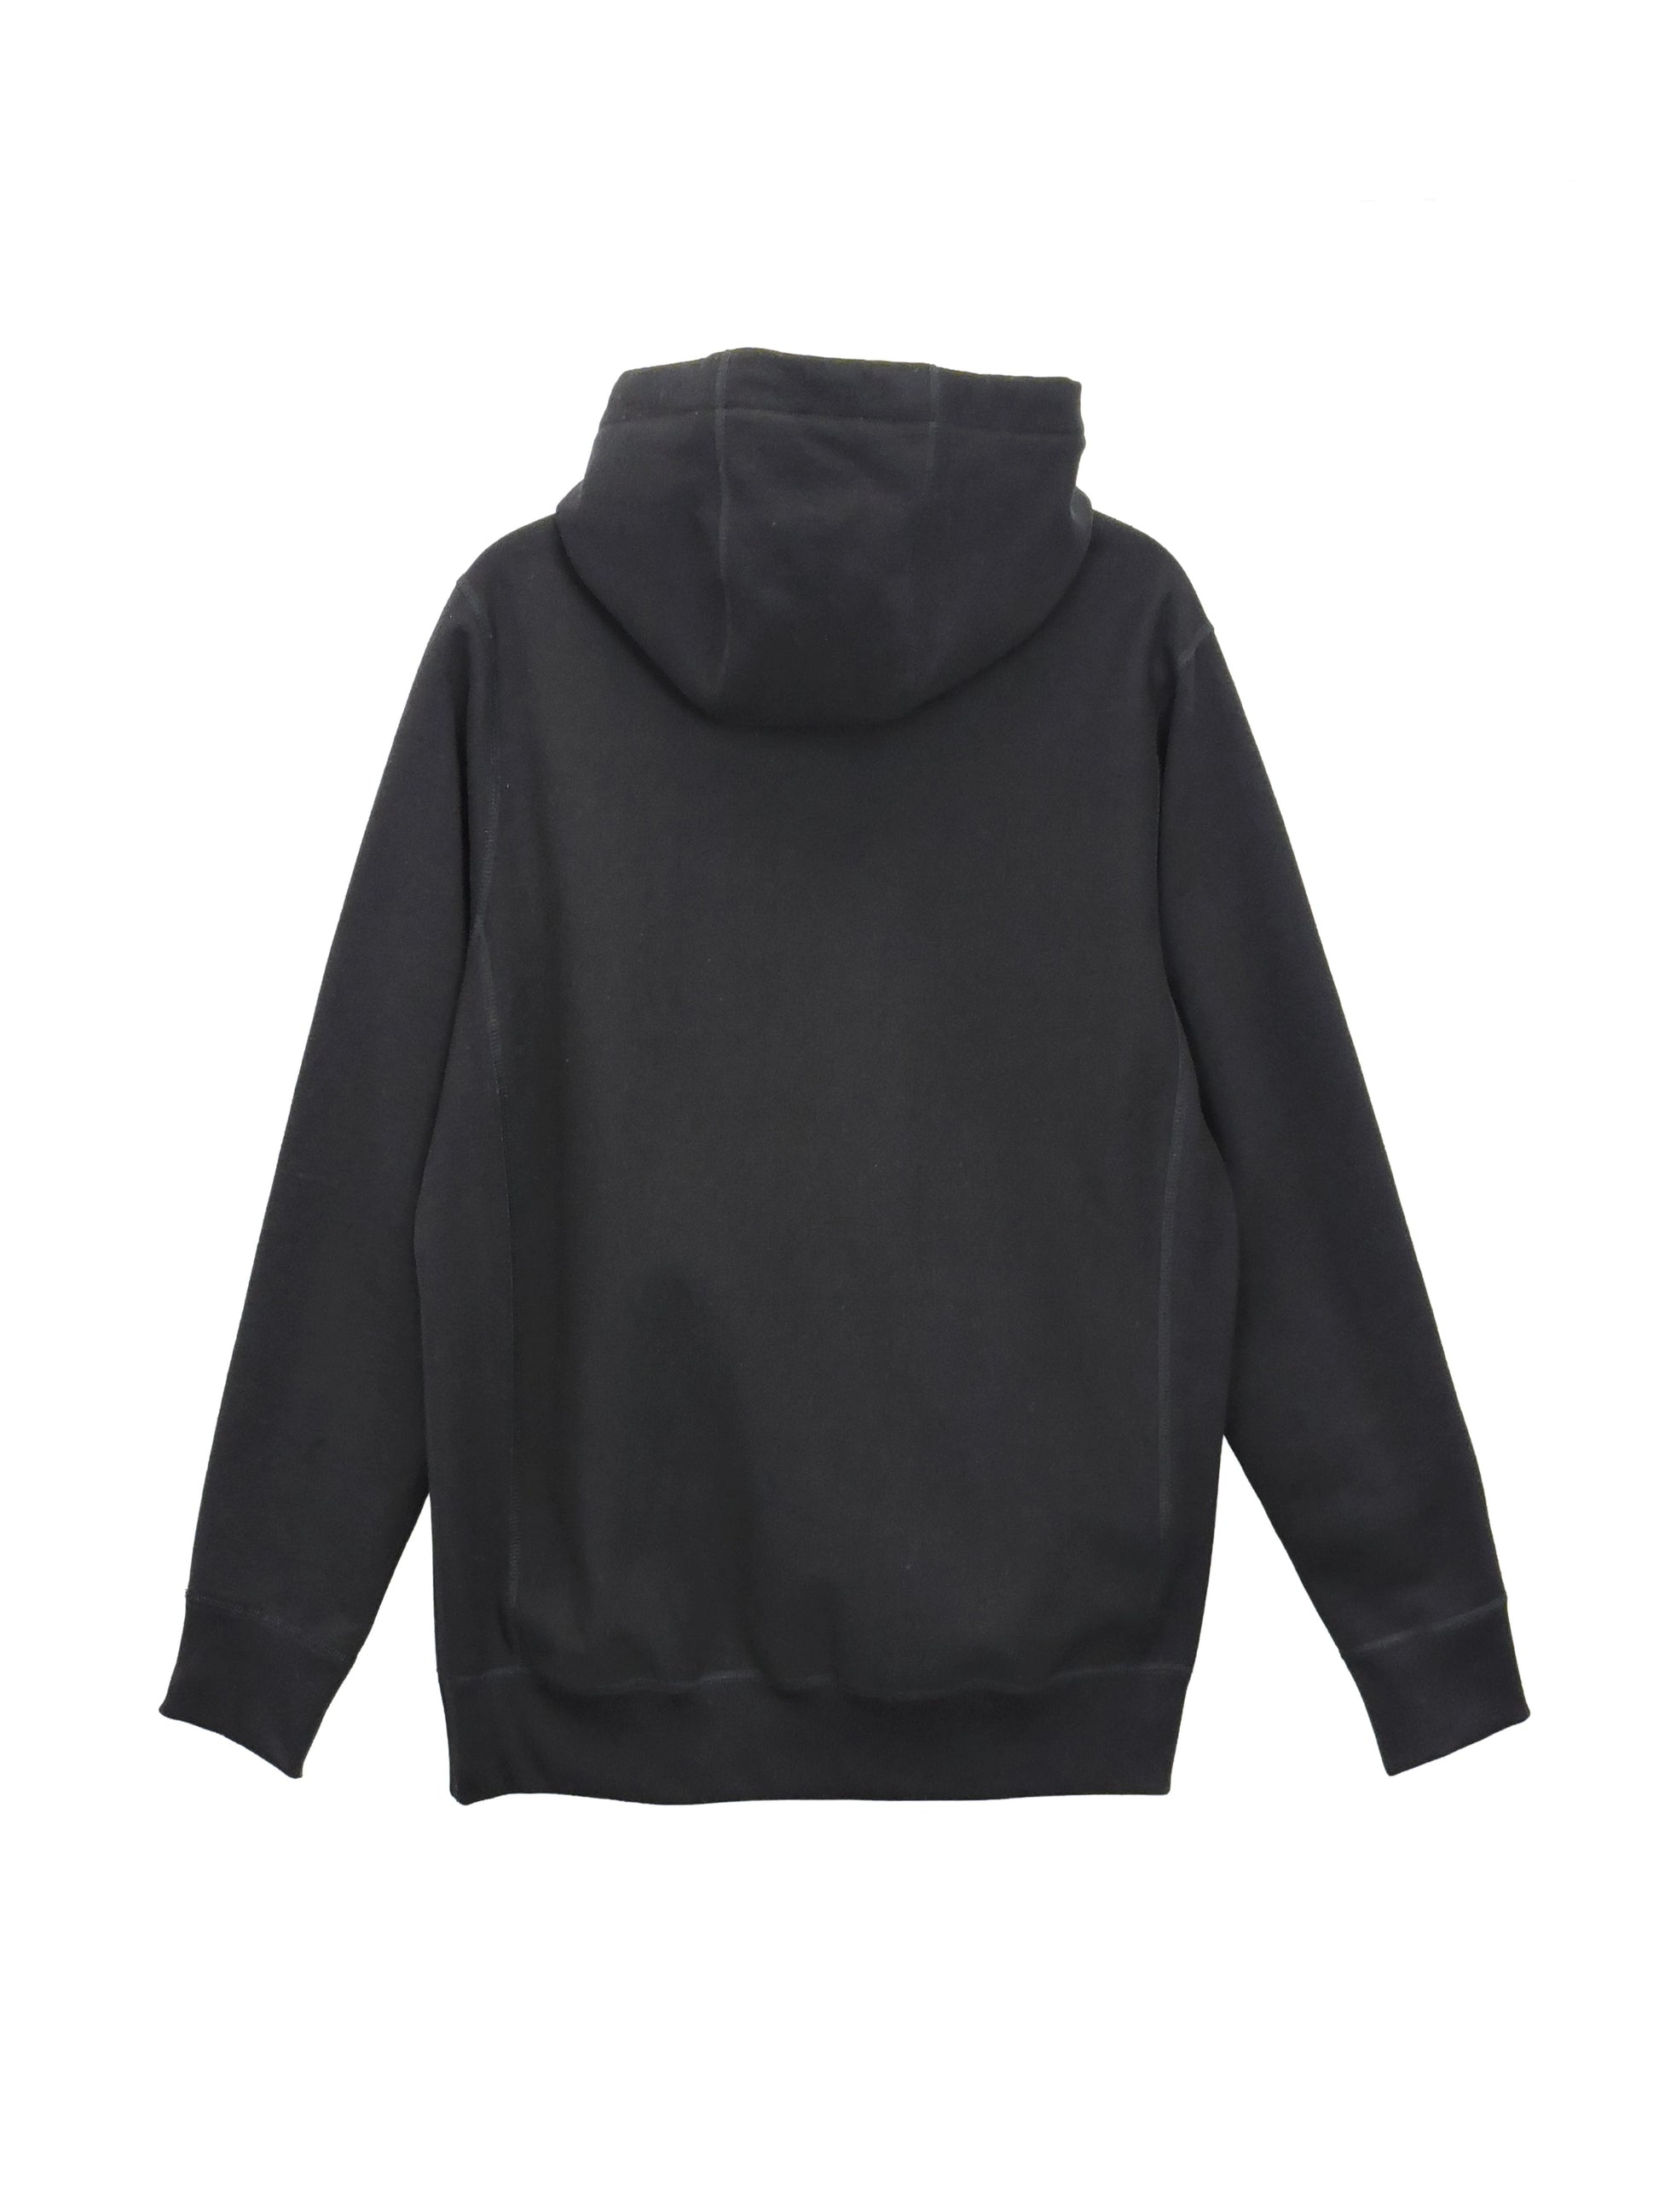 MENS FRENCH TERRY BLACK HOODIE